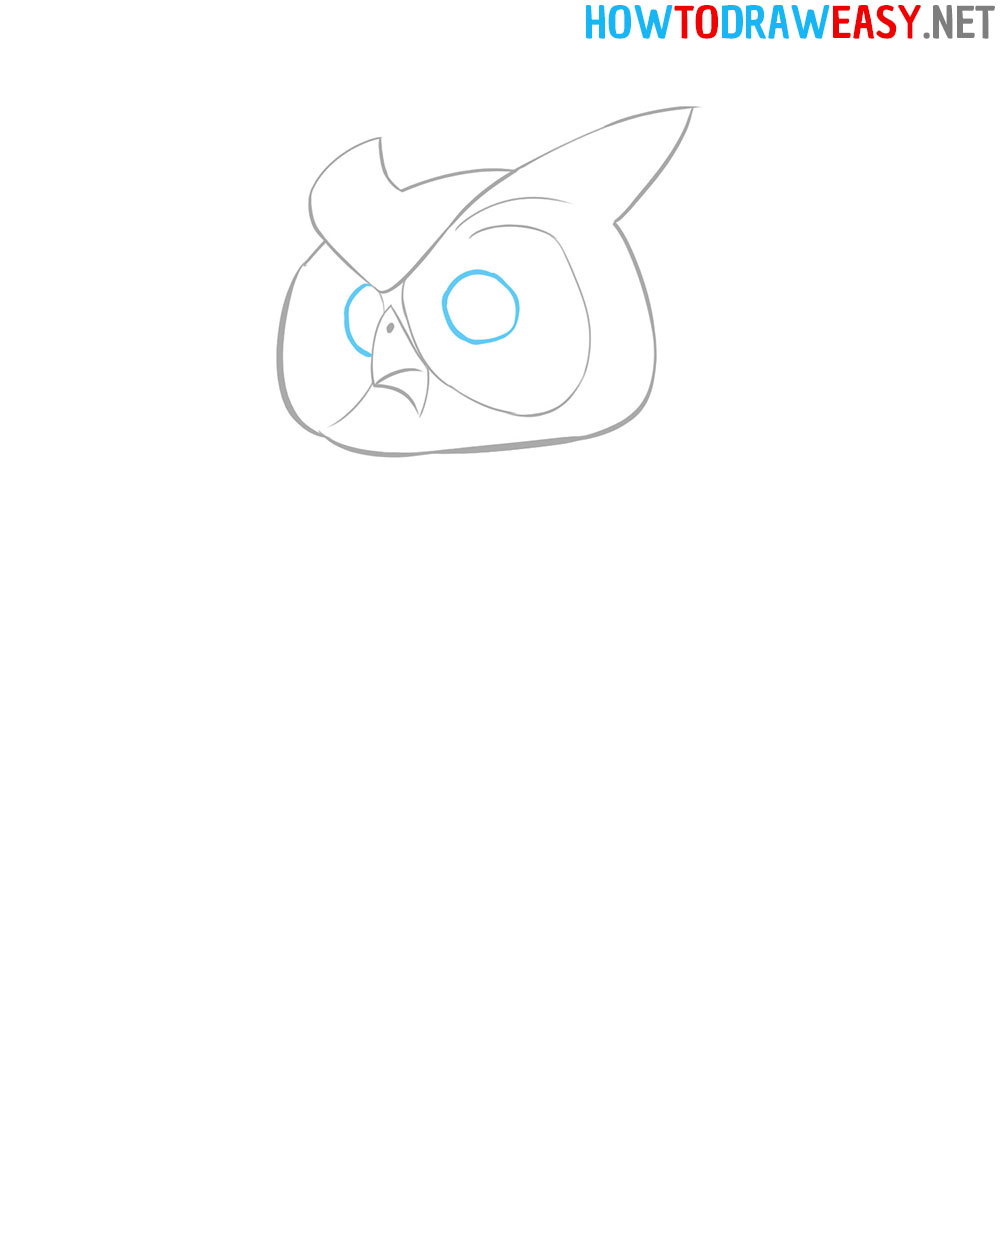 How to Draw an Owl Eyes